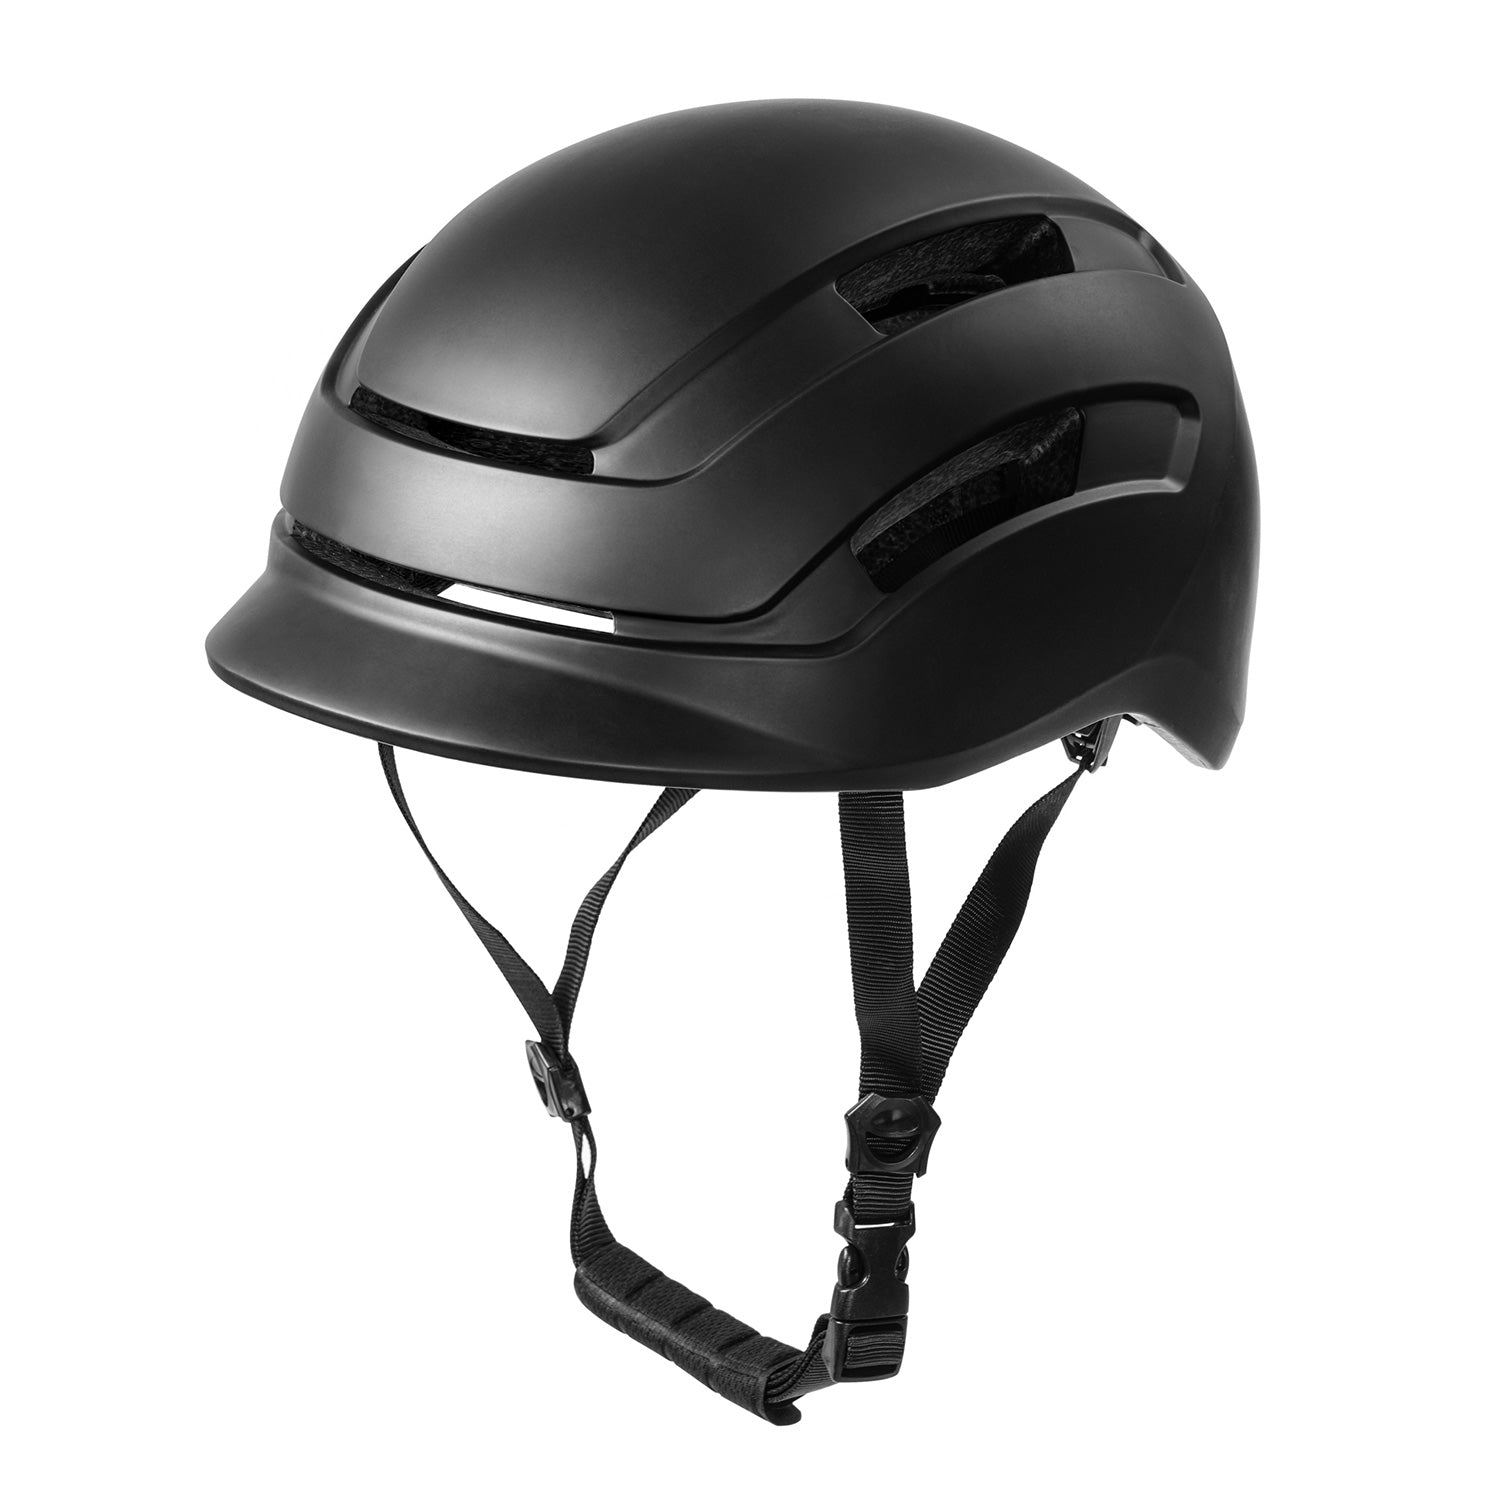 NIU KQi3 Electric Scooter Helmet with LED Light